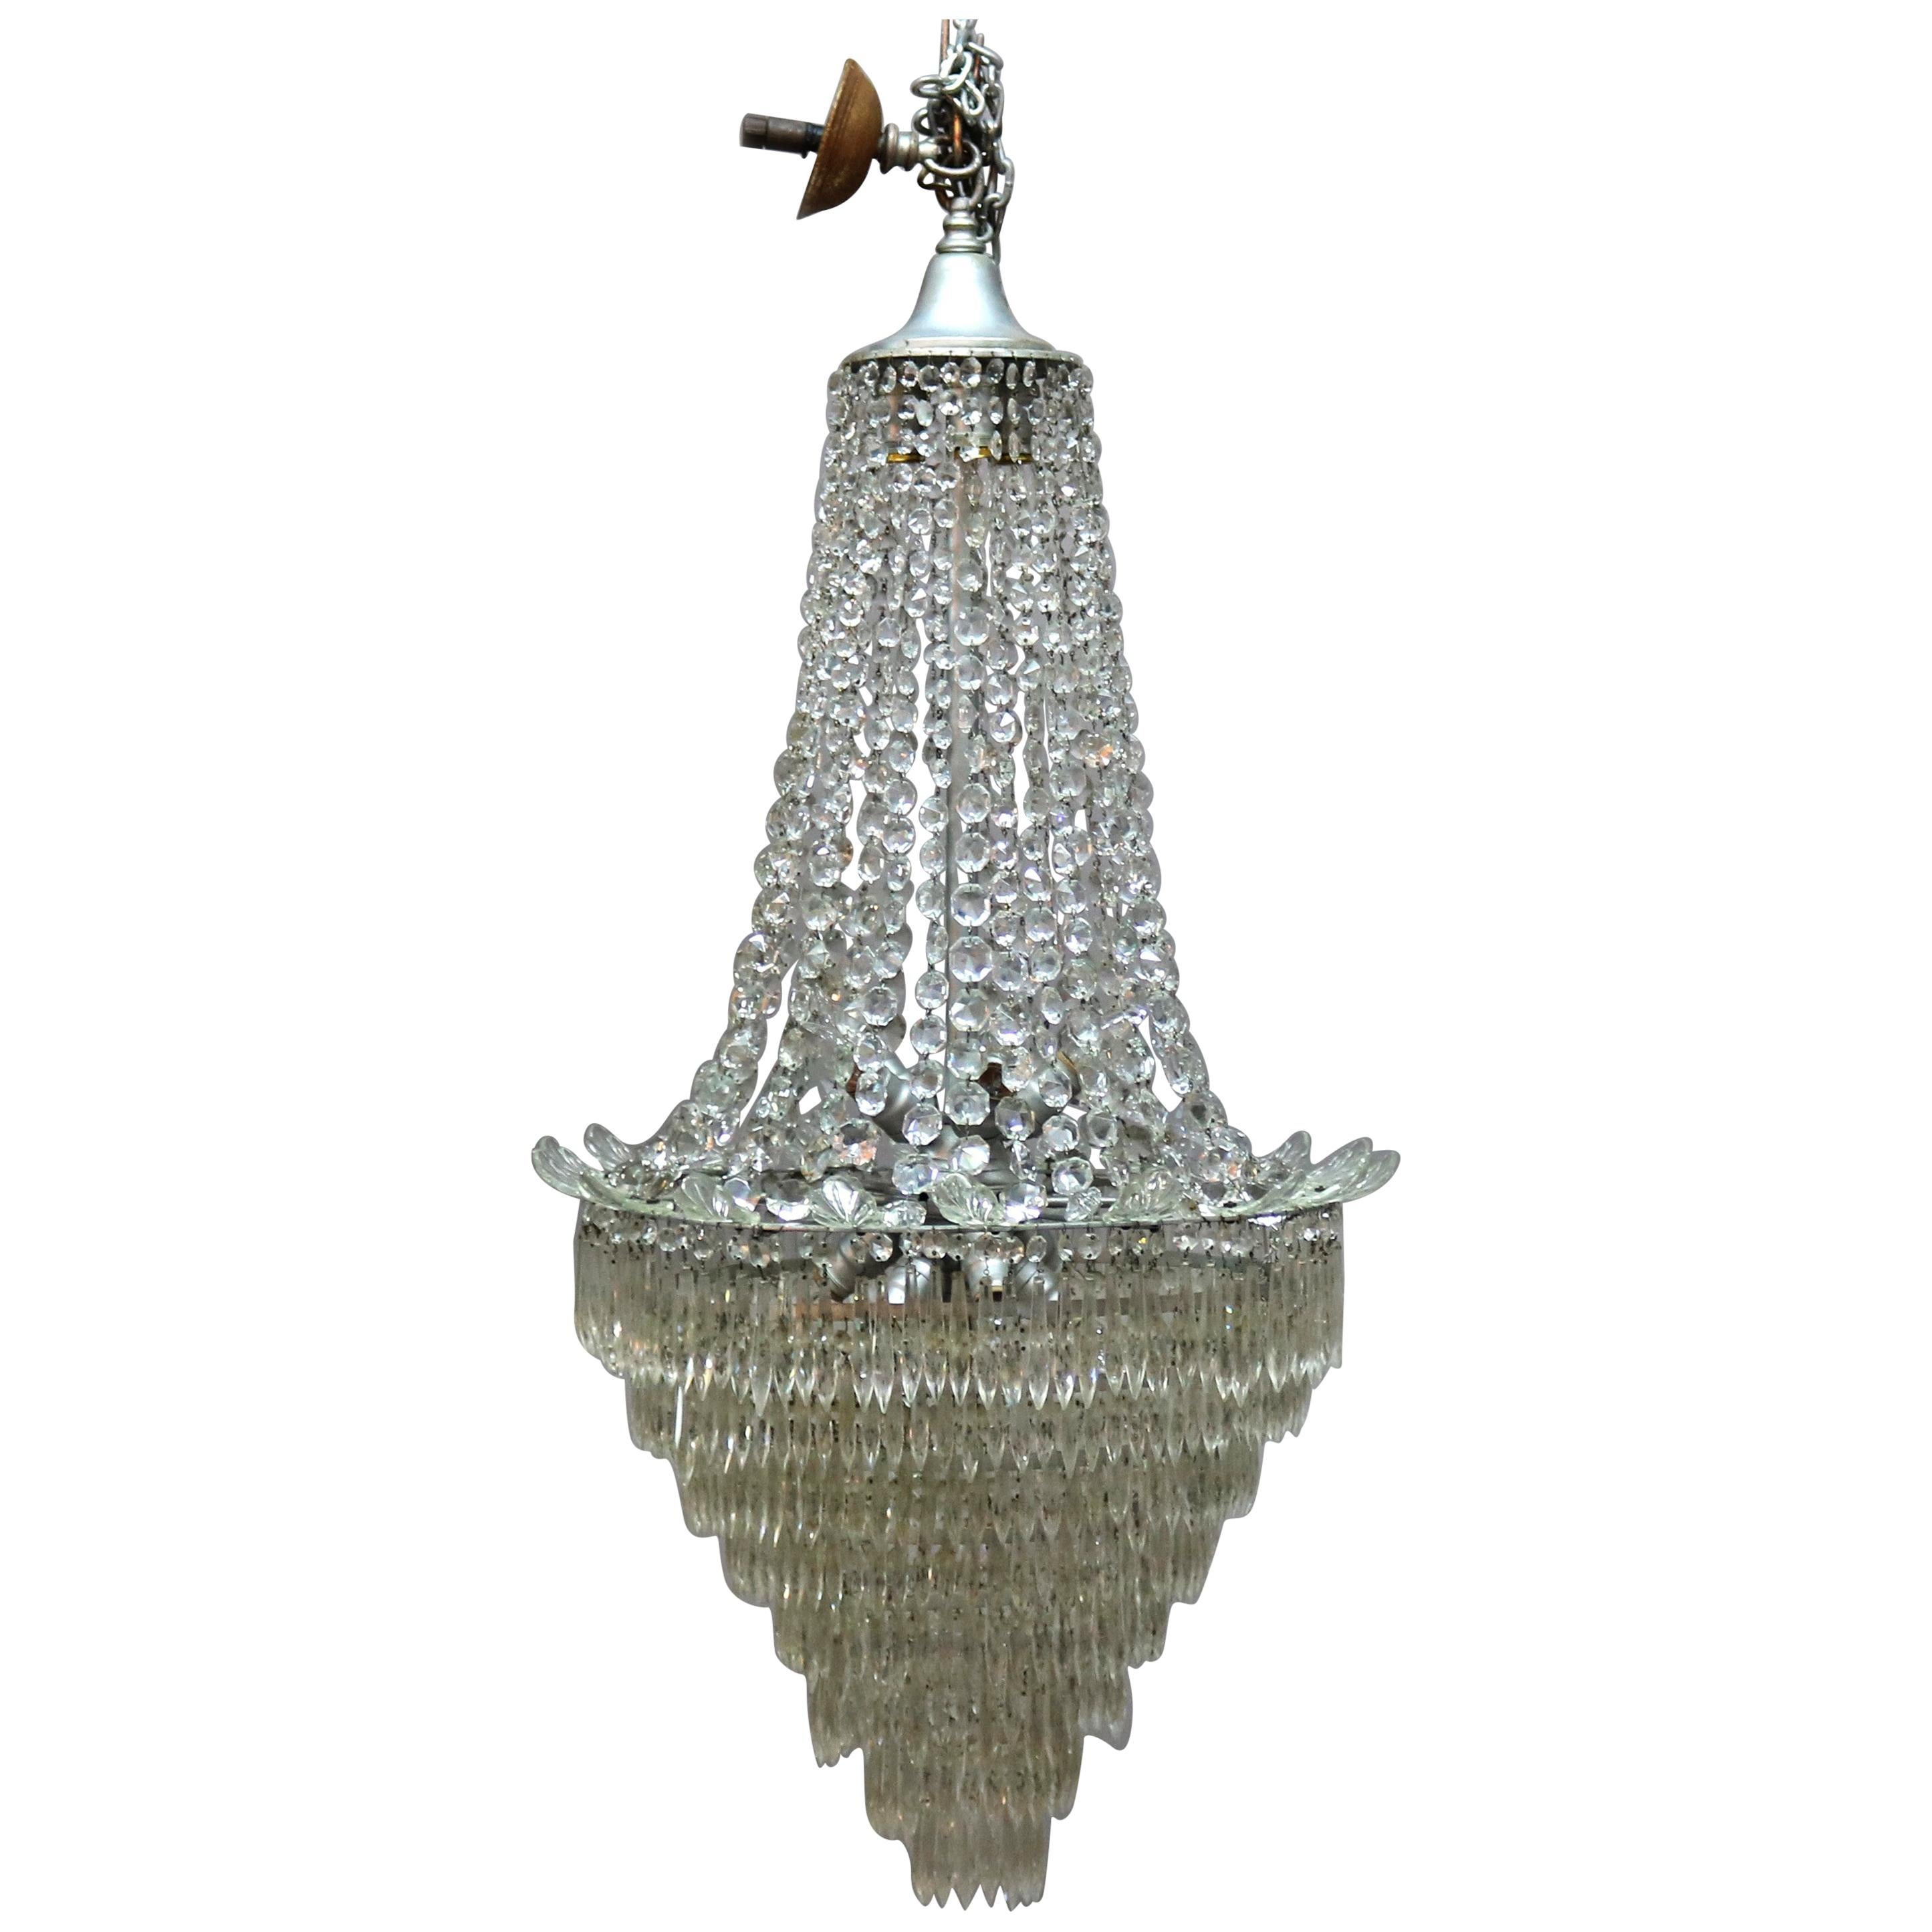 Vintage French Draped Crystal Tiered Wedding Cake 15-Light Chandelier